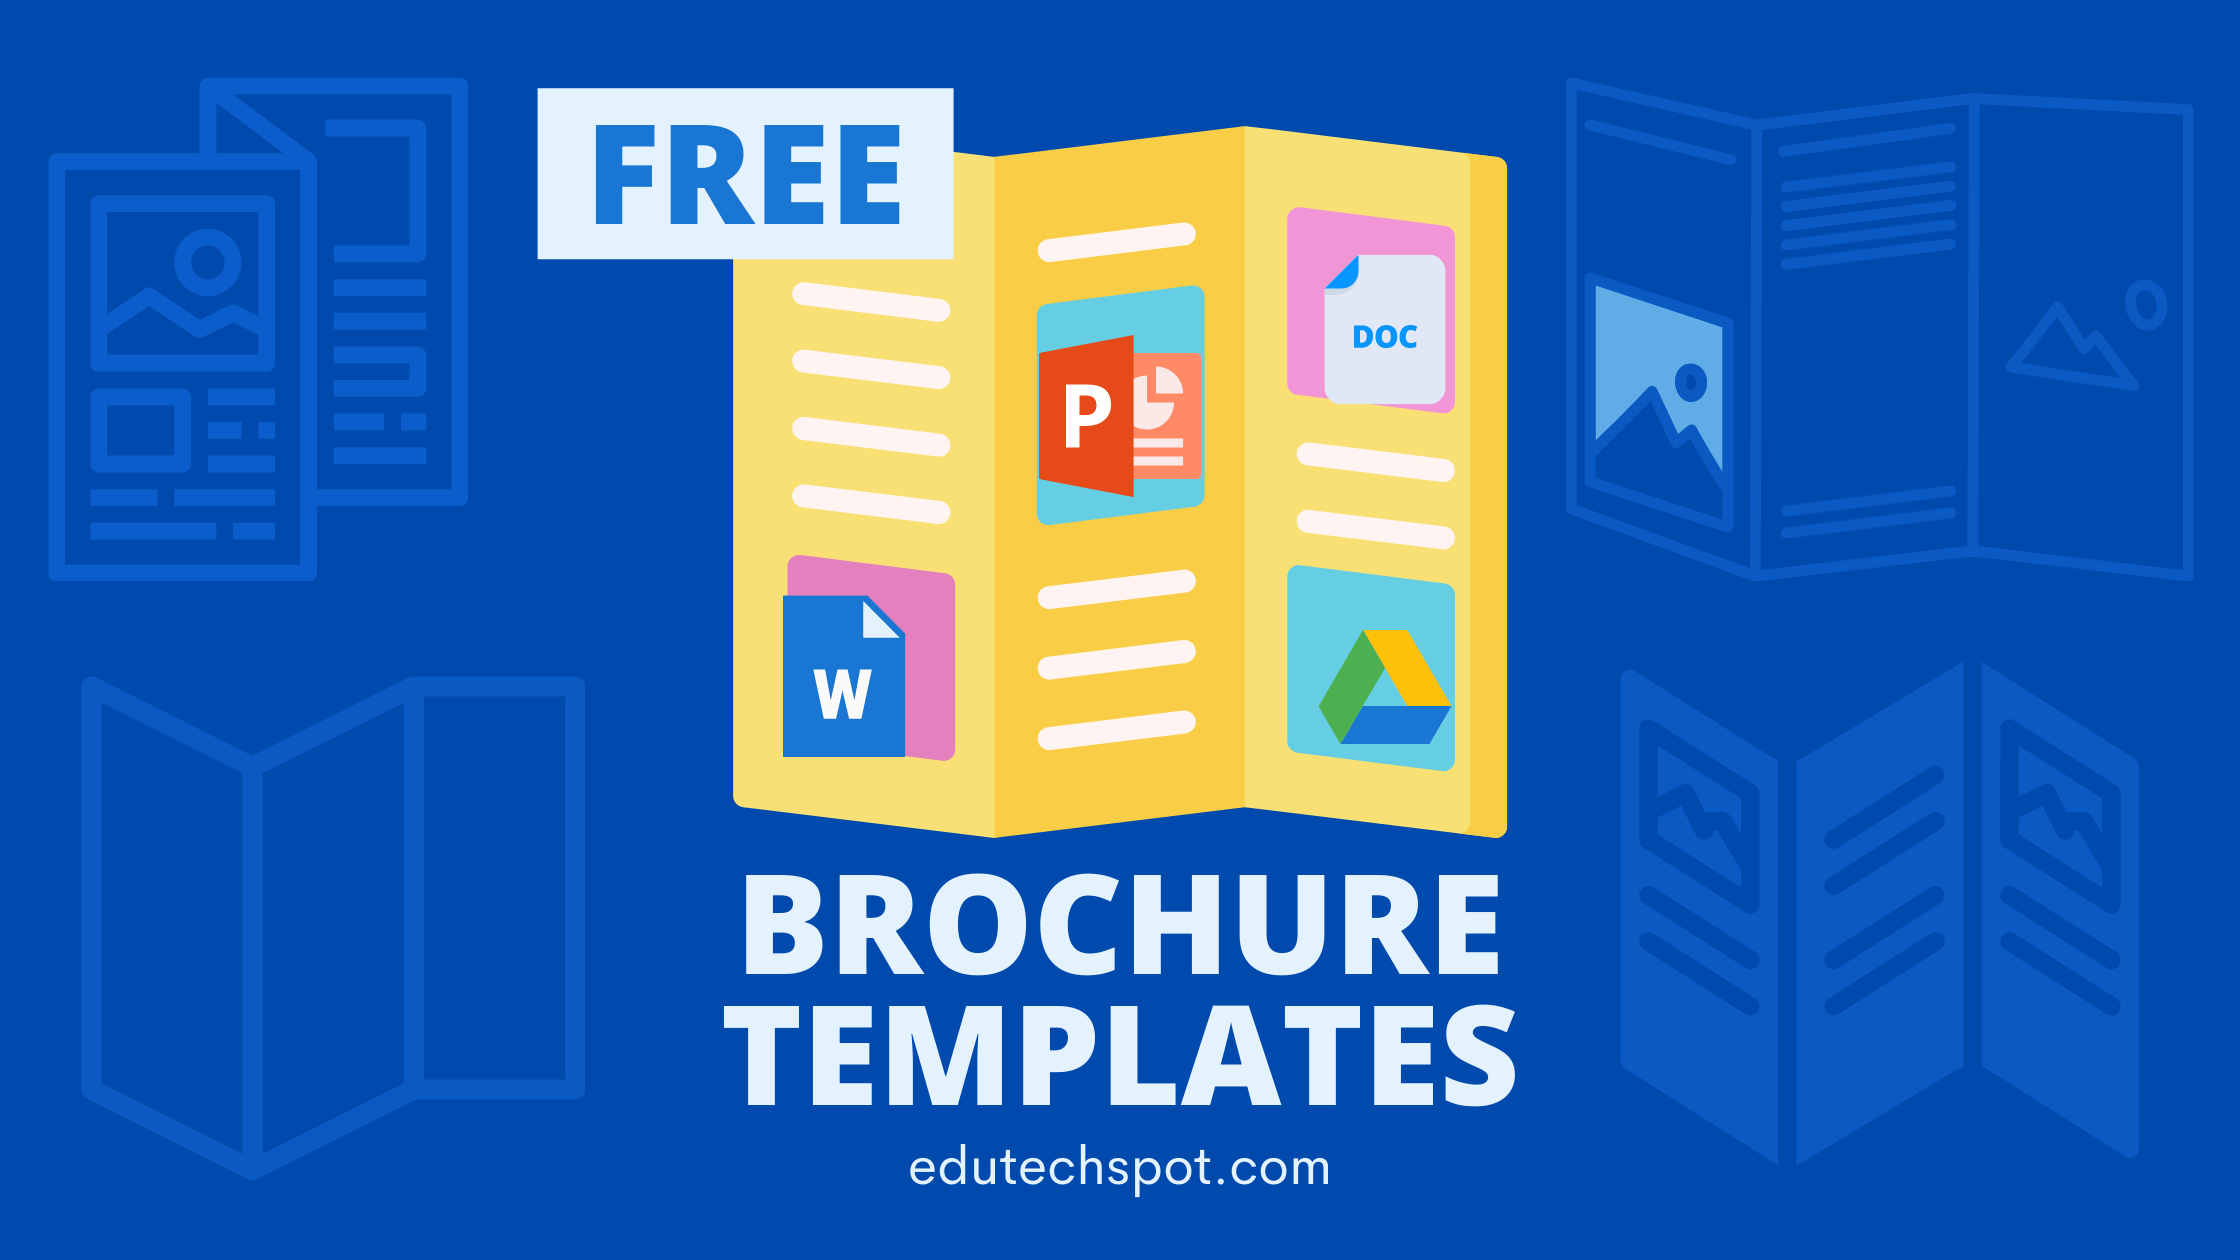 Brochure Template for google docs, Words, Power Point, Slides [ FREE ] Within Google Drive Brochure Templates